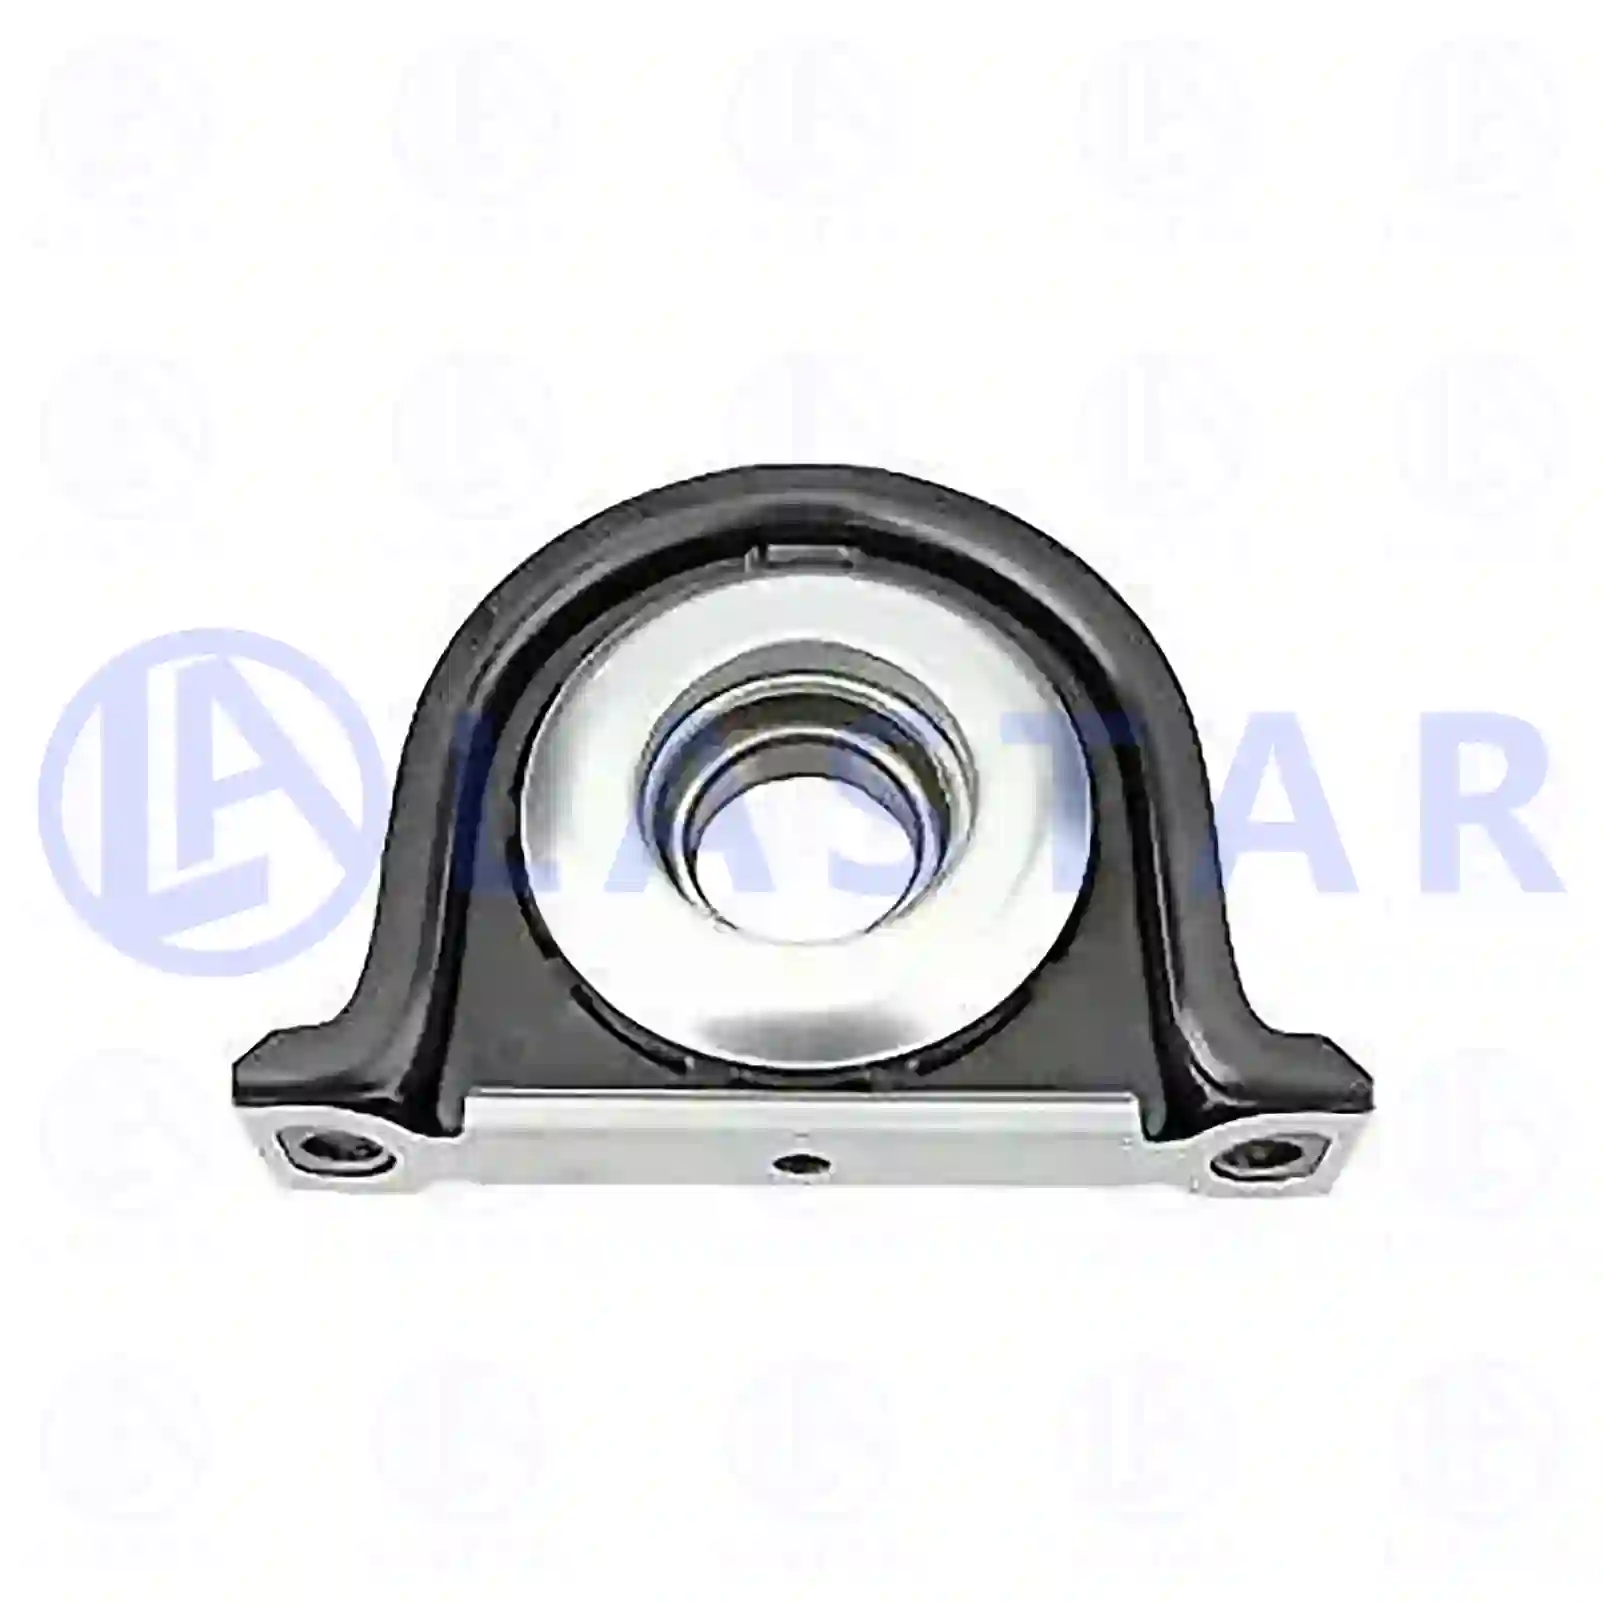 Support Bearing Center bearing, la no: 77734320 ,  oem no:5000589888 Lastar Spare Part | Truck Spare Parts, Auotomotive Spare Parts